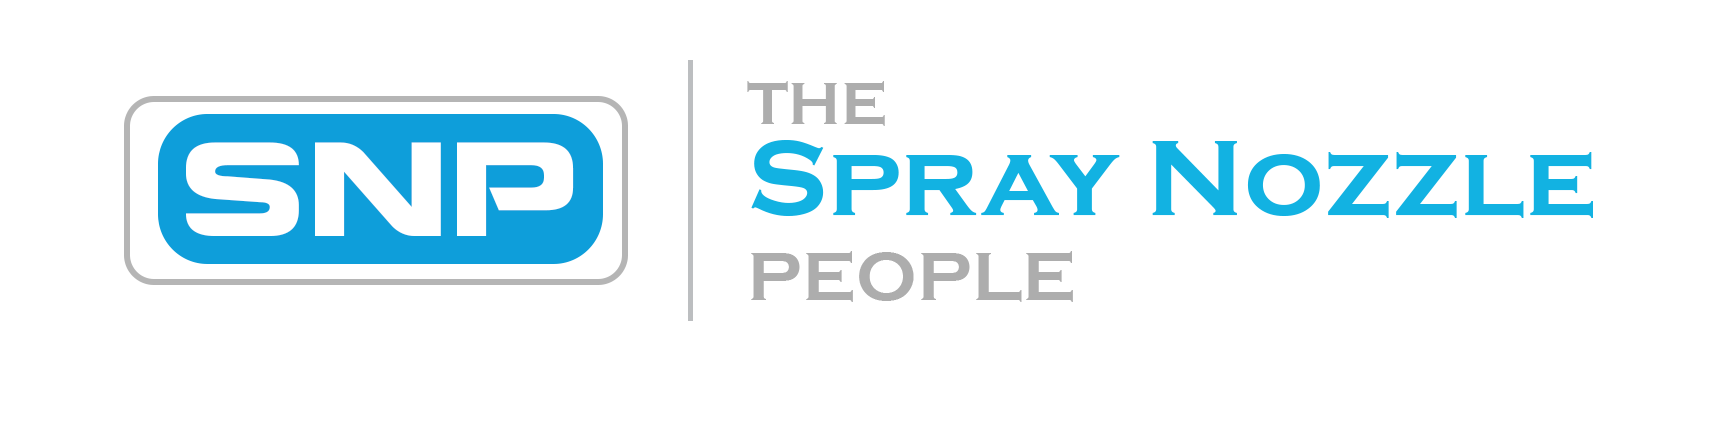 Spray Nozzle People Logo Clear_1